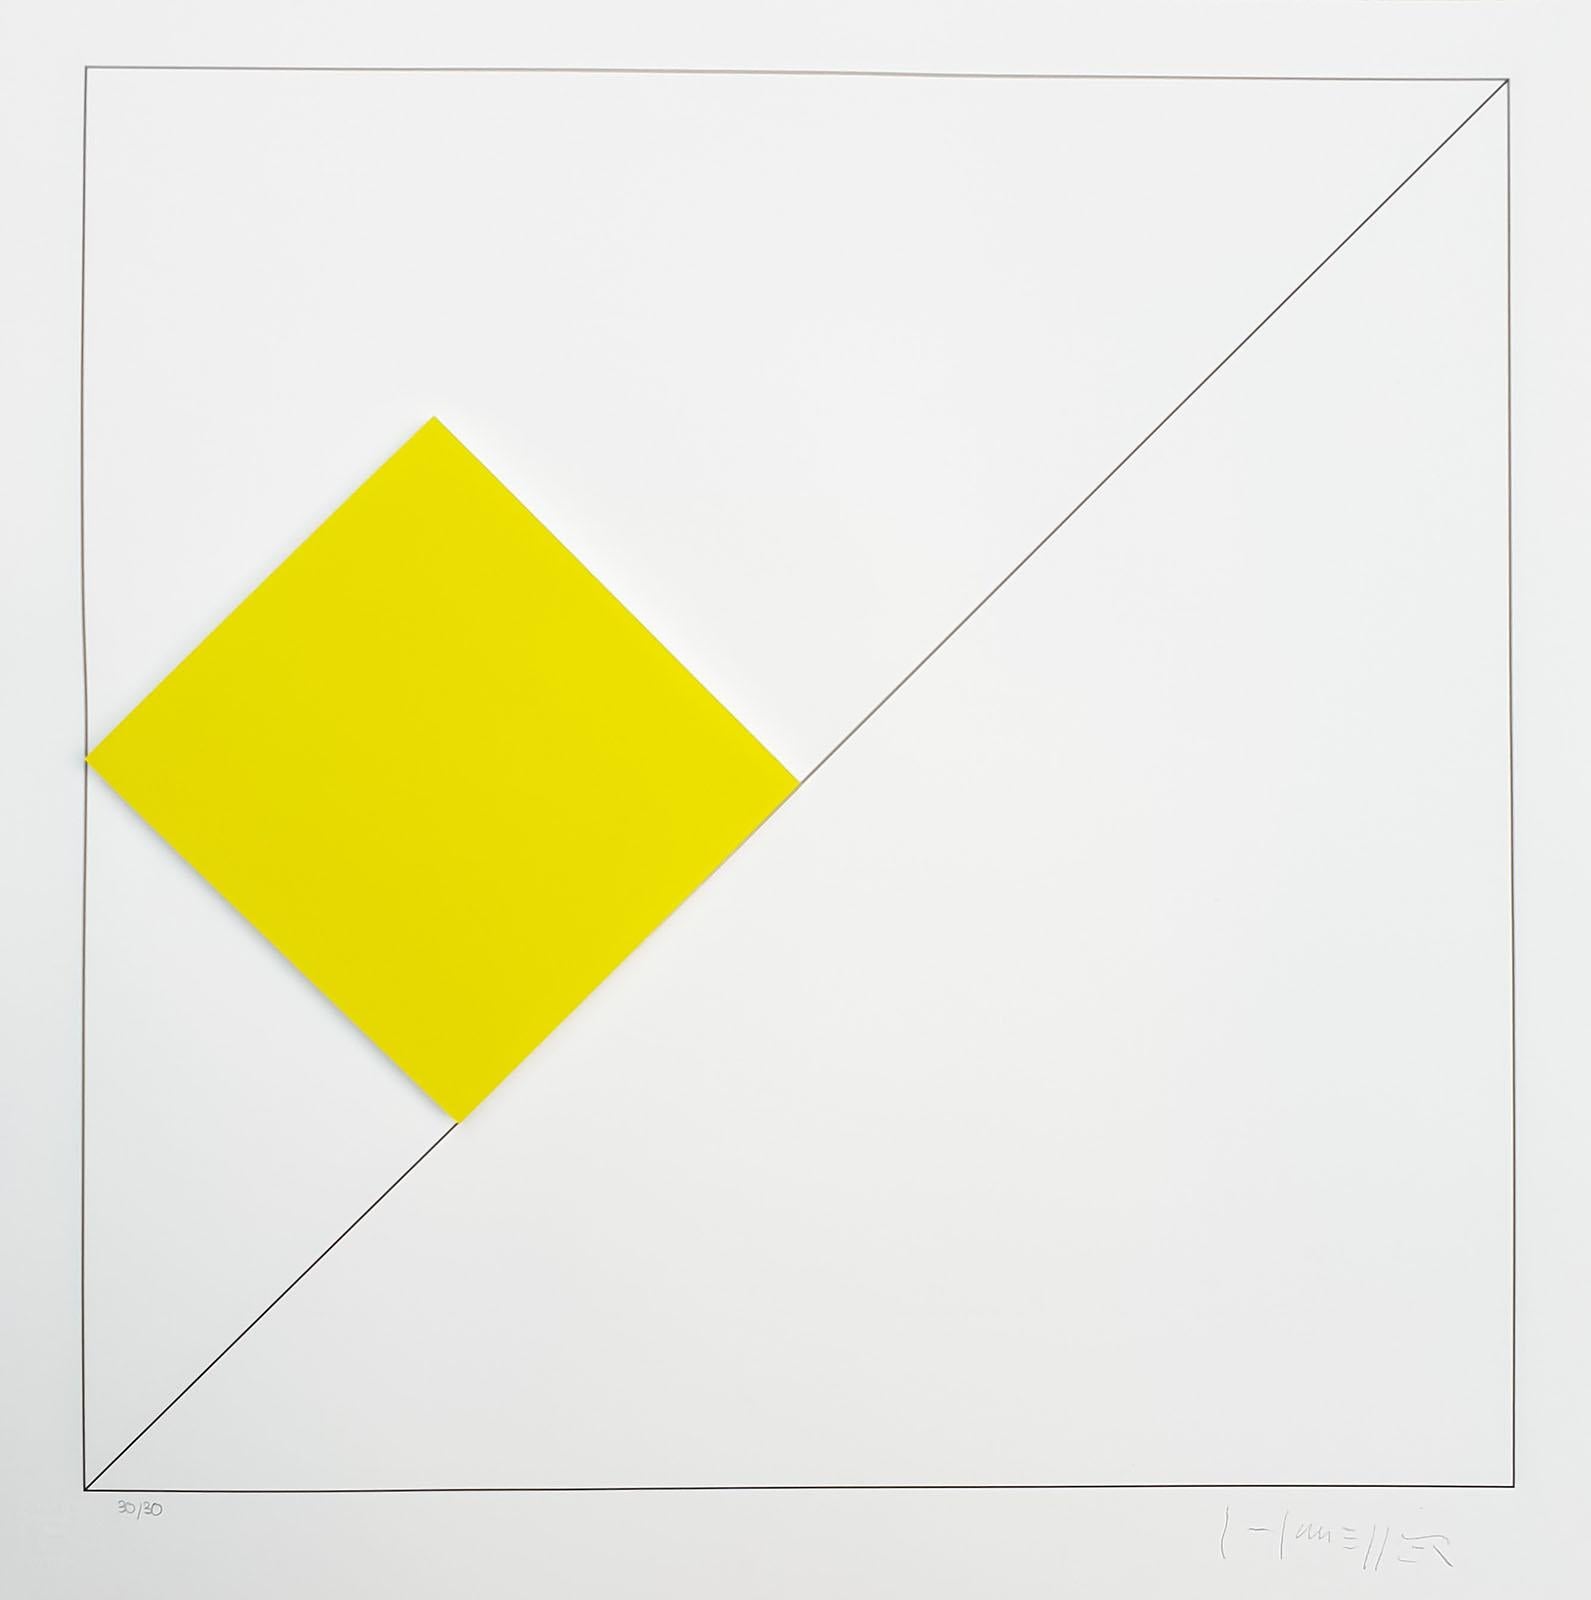 Gottfried Honegger
Composition 1 3D square (yellow)
2015
Silkscreen print signed in pencil and numbered on 30 copies by the artist.
Dry stamp of the publisher in the margin at the lower left corner.
Condition: excellent; the work has never been